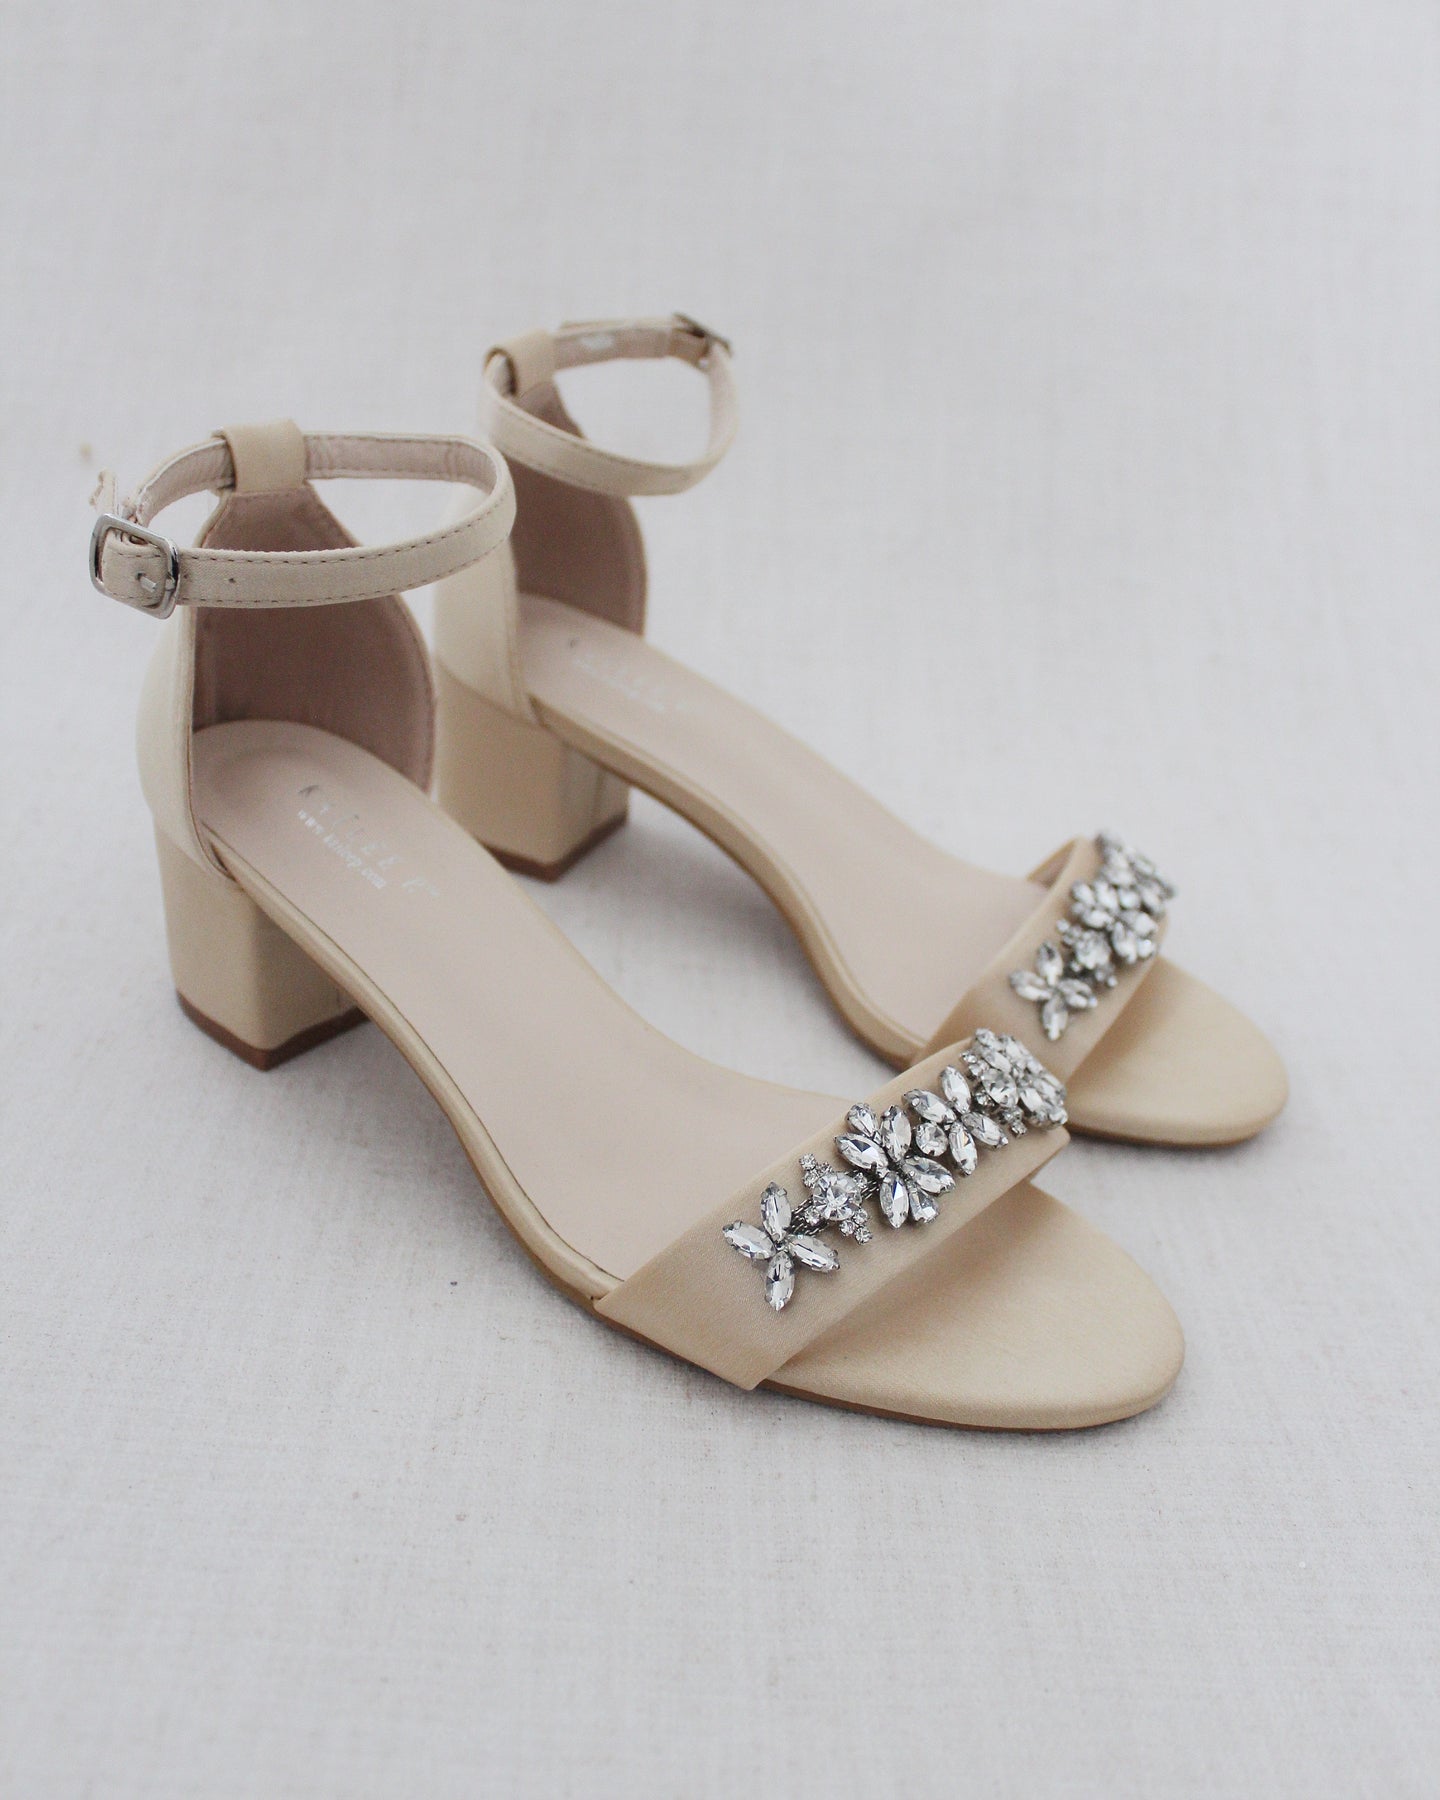 Champagne Satin Block Heel Sandals with FLORAL RHINESTONES on Upper St ...